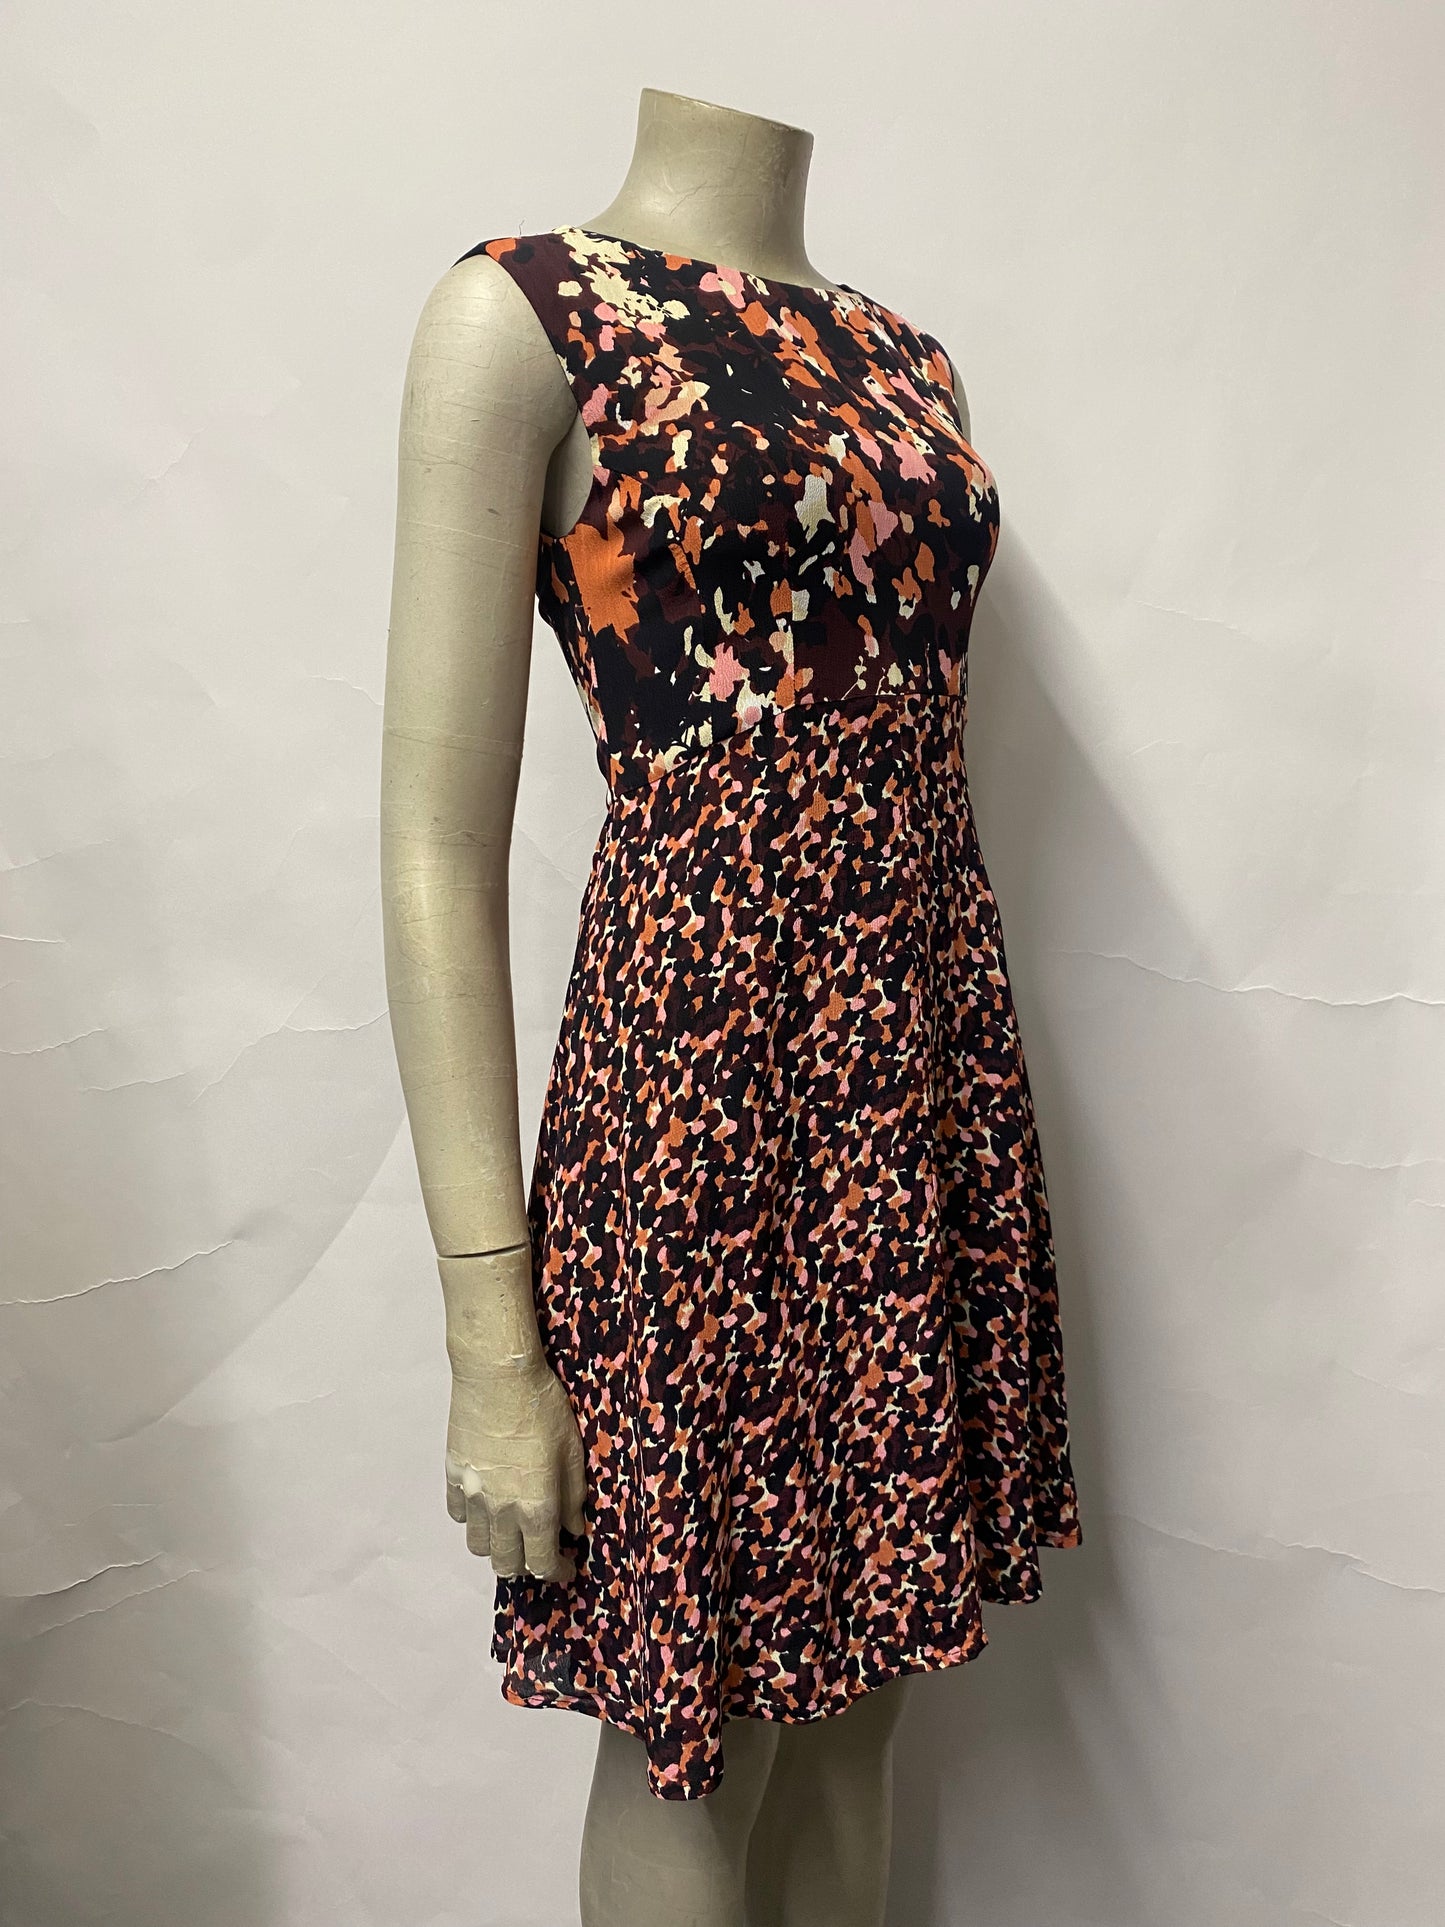 French Connection Black and Pink Floral Summer Dress 6